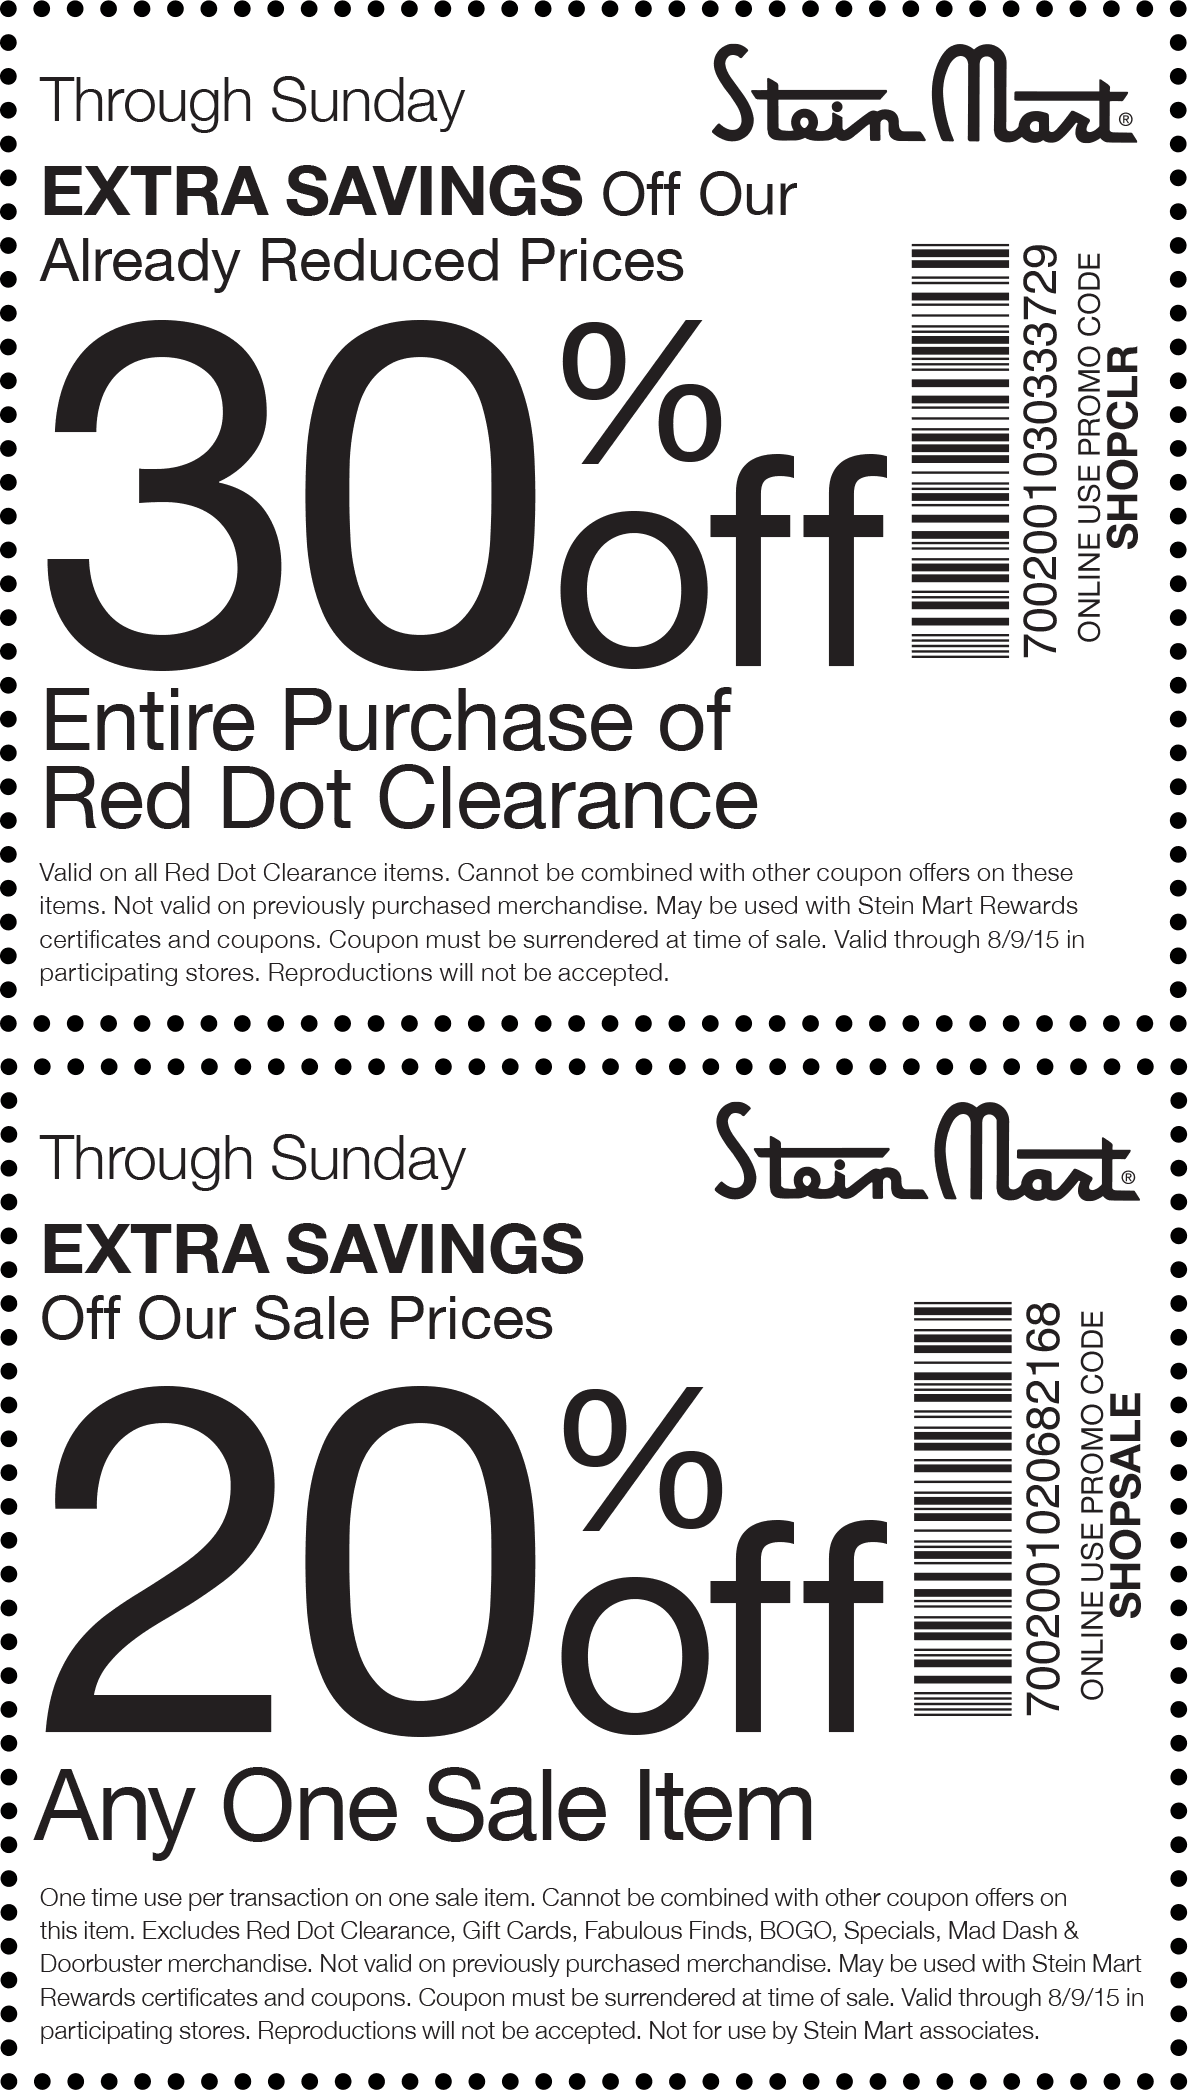 steinmart coupons couponcabin